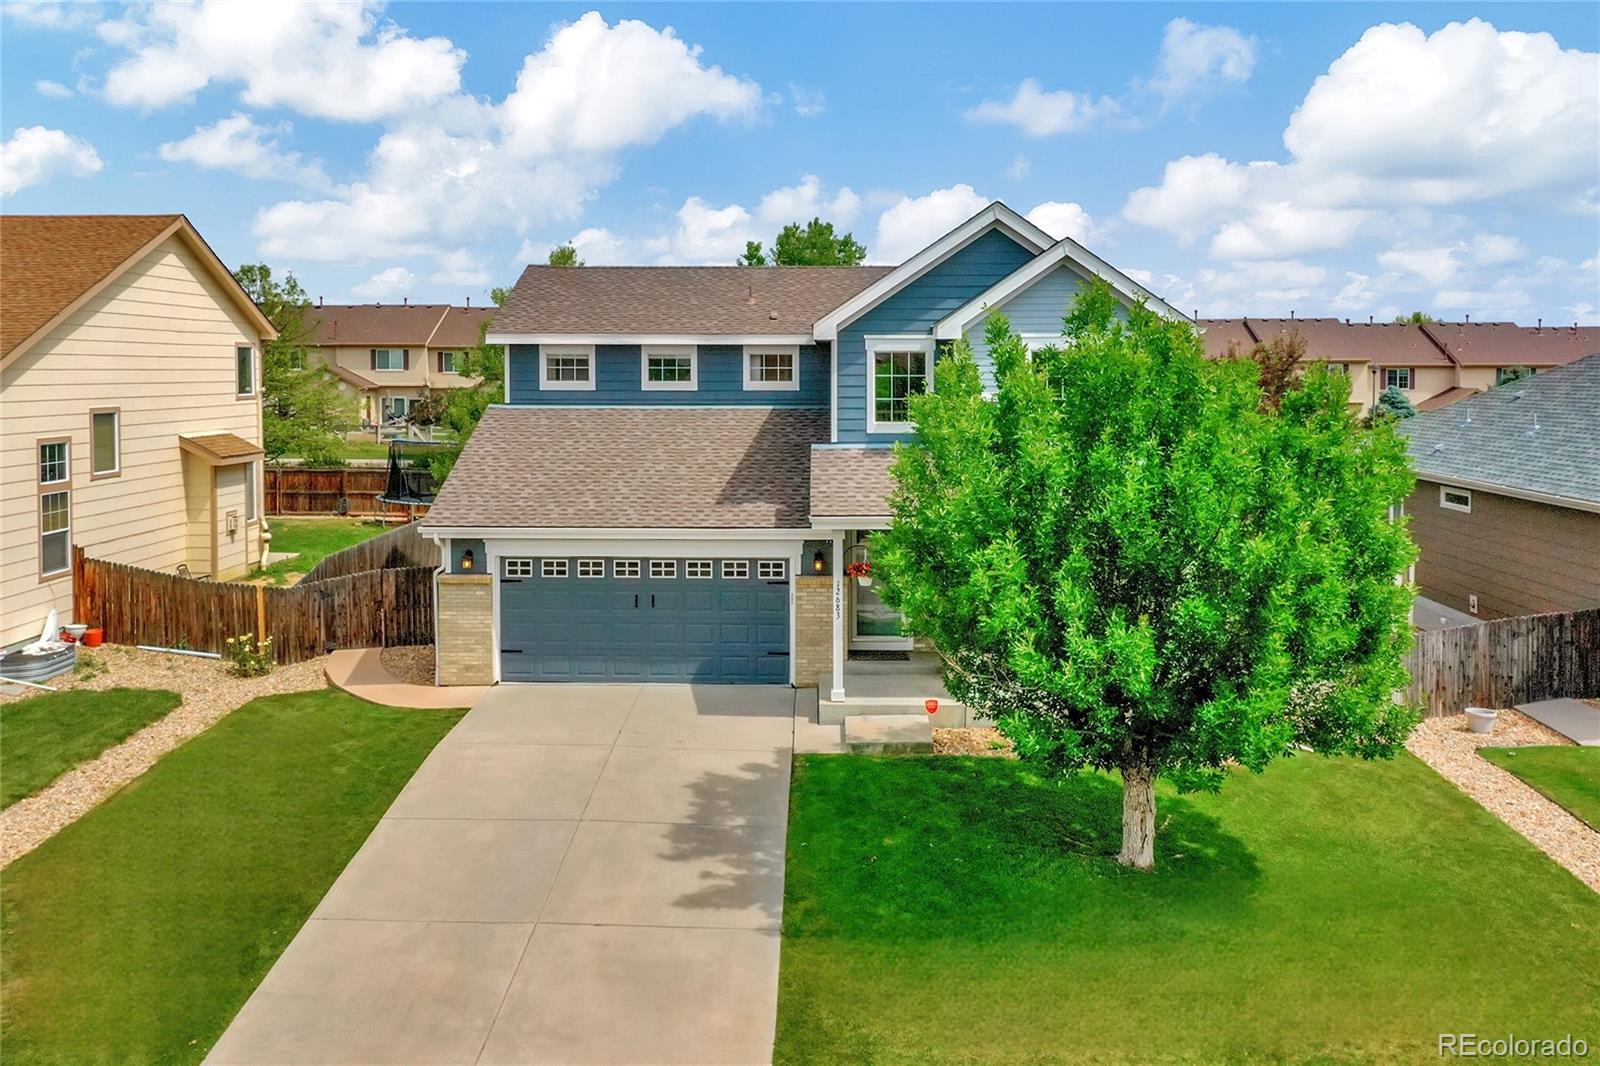 Report Image for 12683  Jersey Circle,Thornton, Colorado